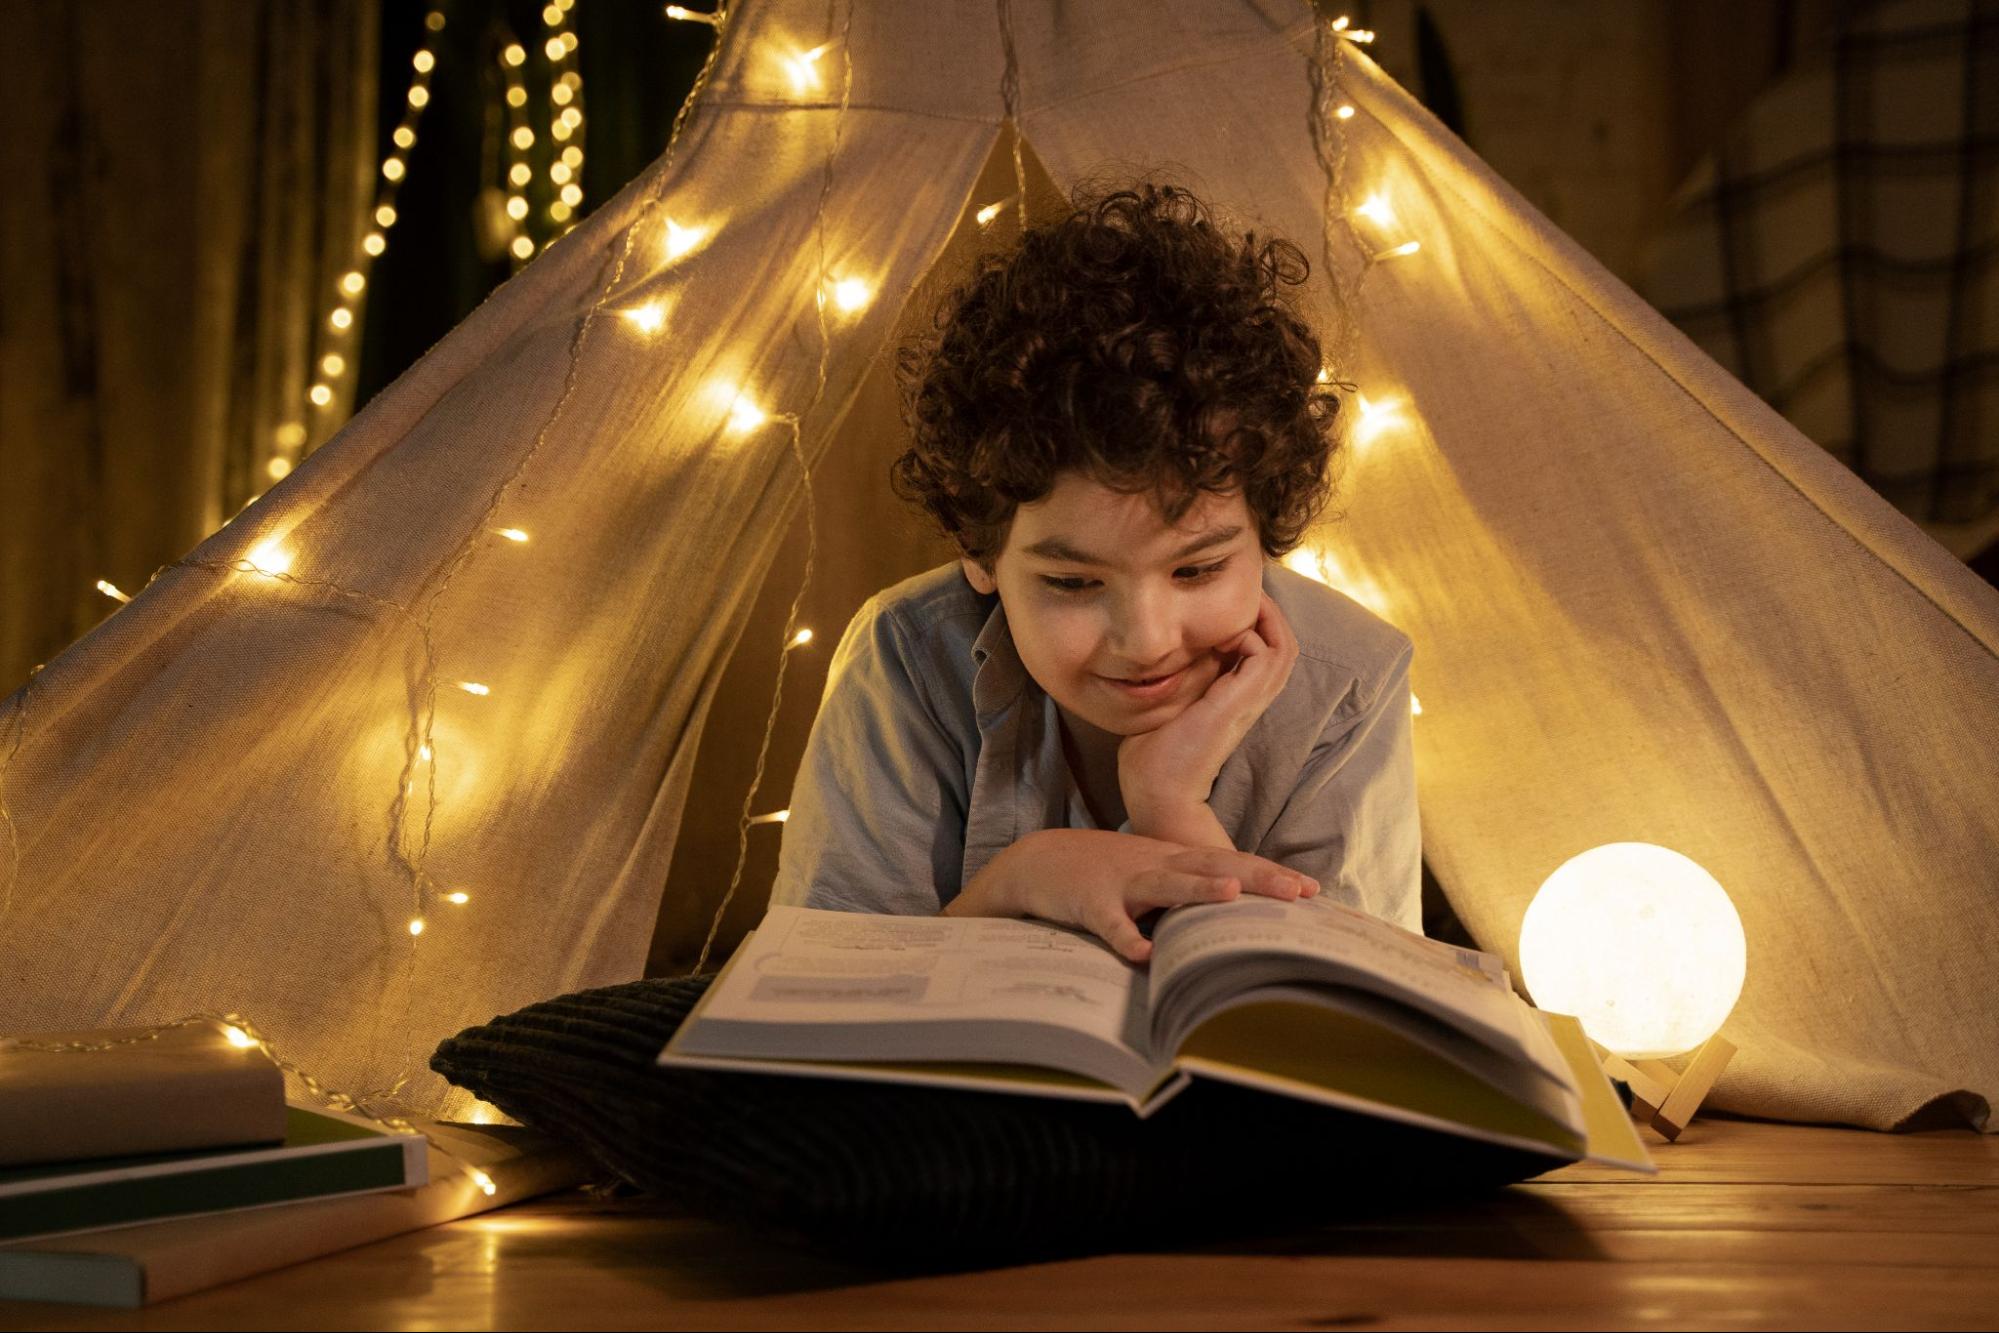 Children enjoying story time with colorful picture books in a cozy setting